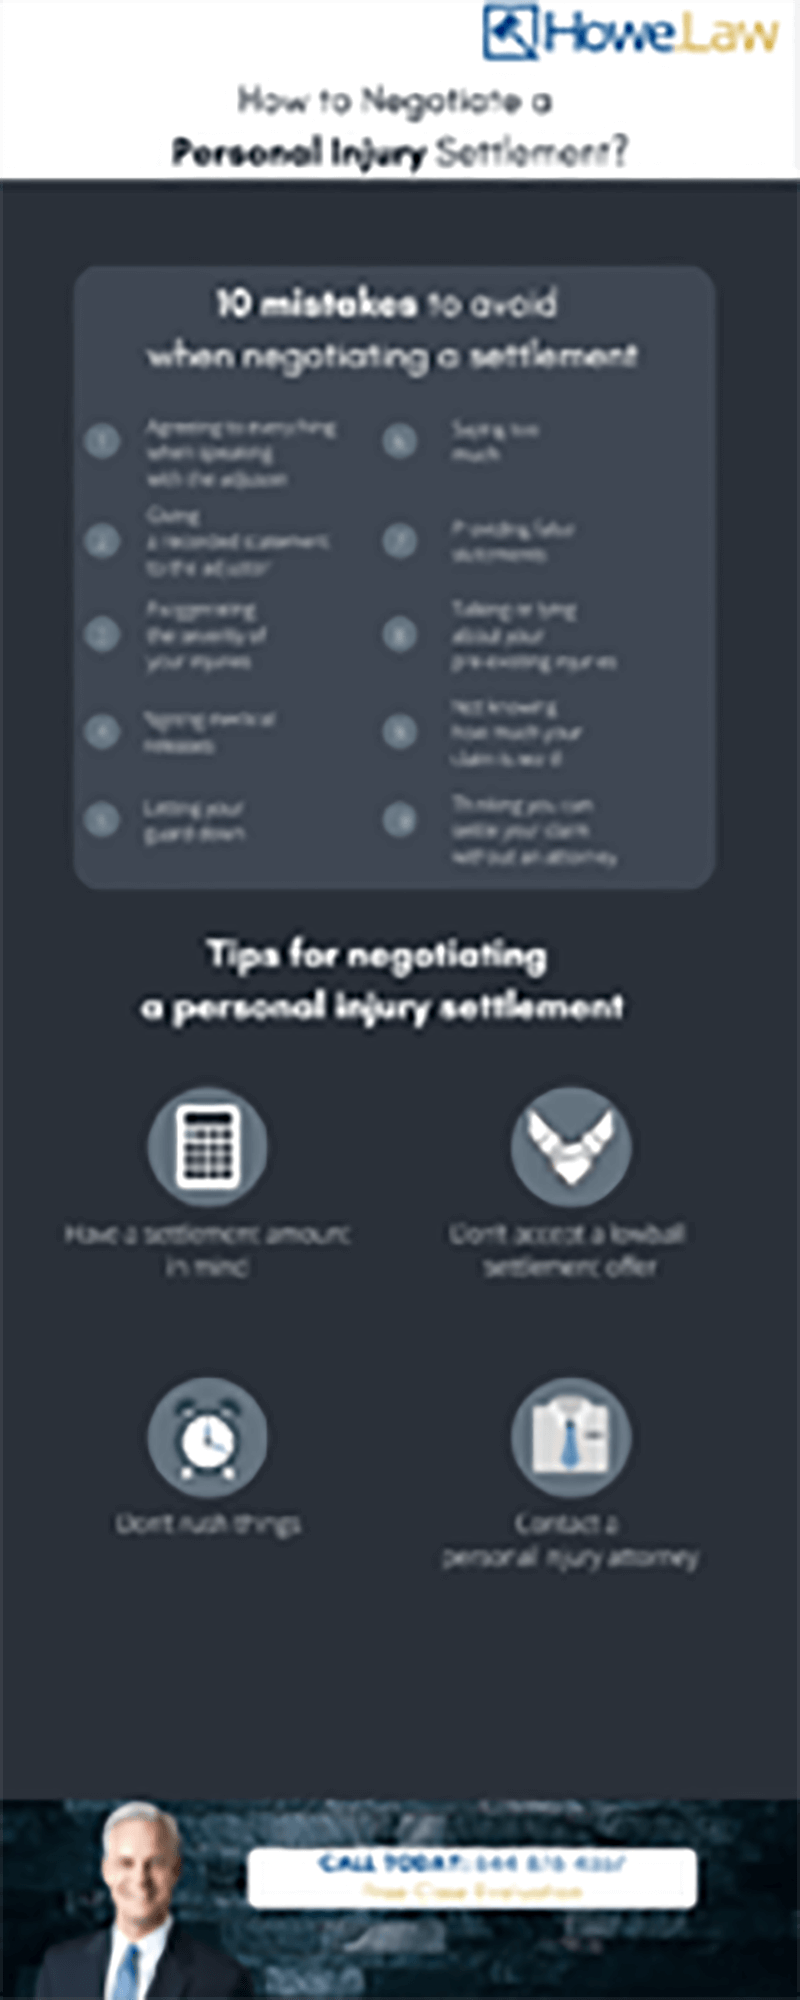 How to Negotiate a Personal Injury Settlement